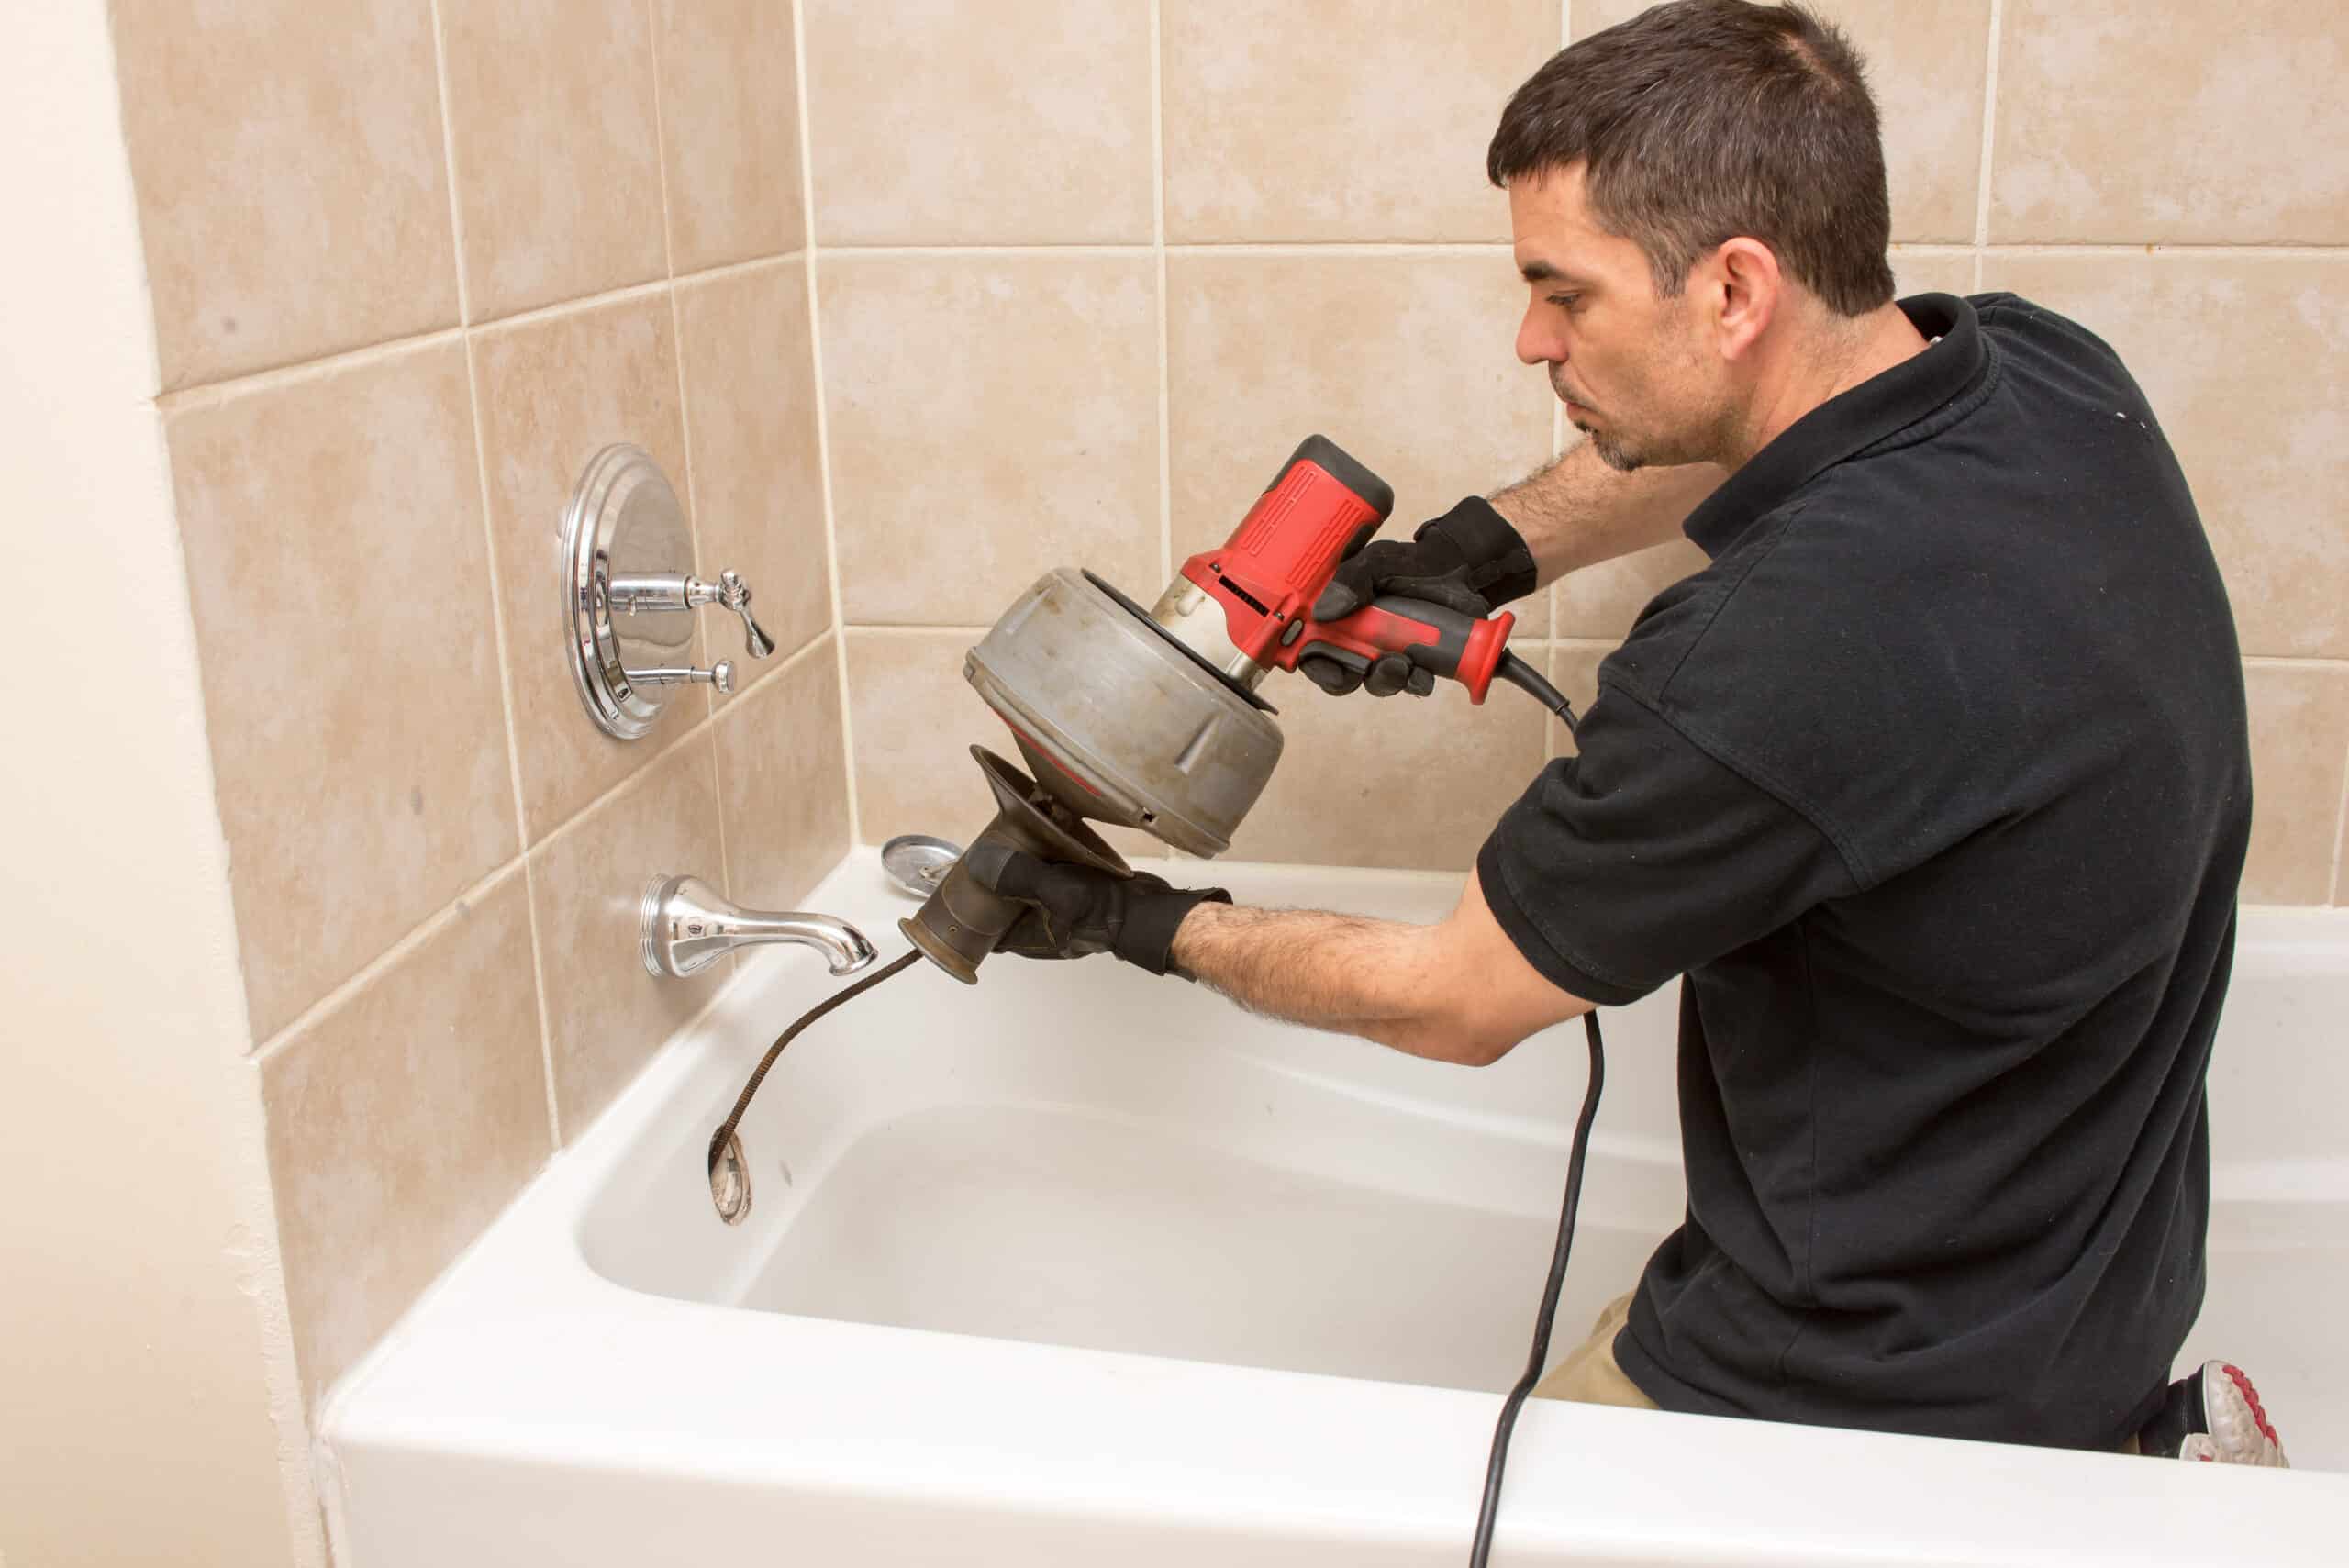 https://www.simplysewersdenver.com/wp-content/uploads/2019/08/24-Hour-Emergency-Drain-Cleaning.jpg